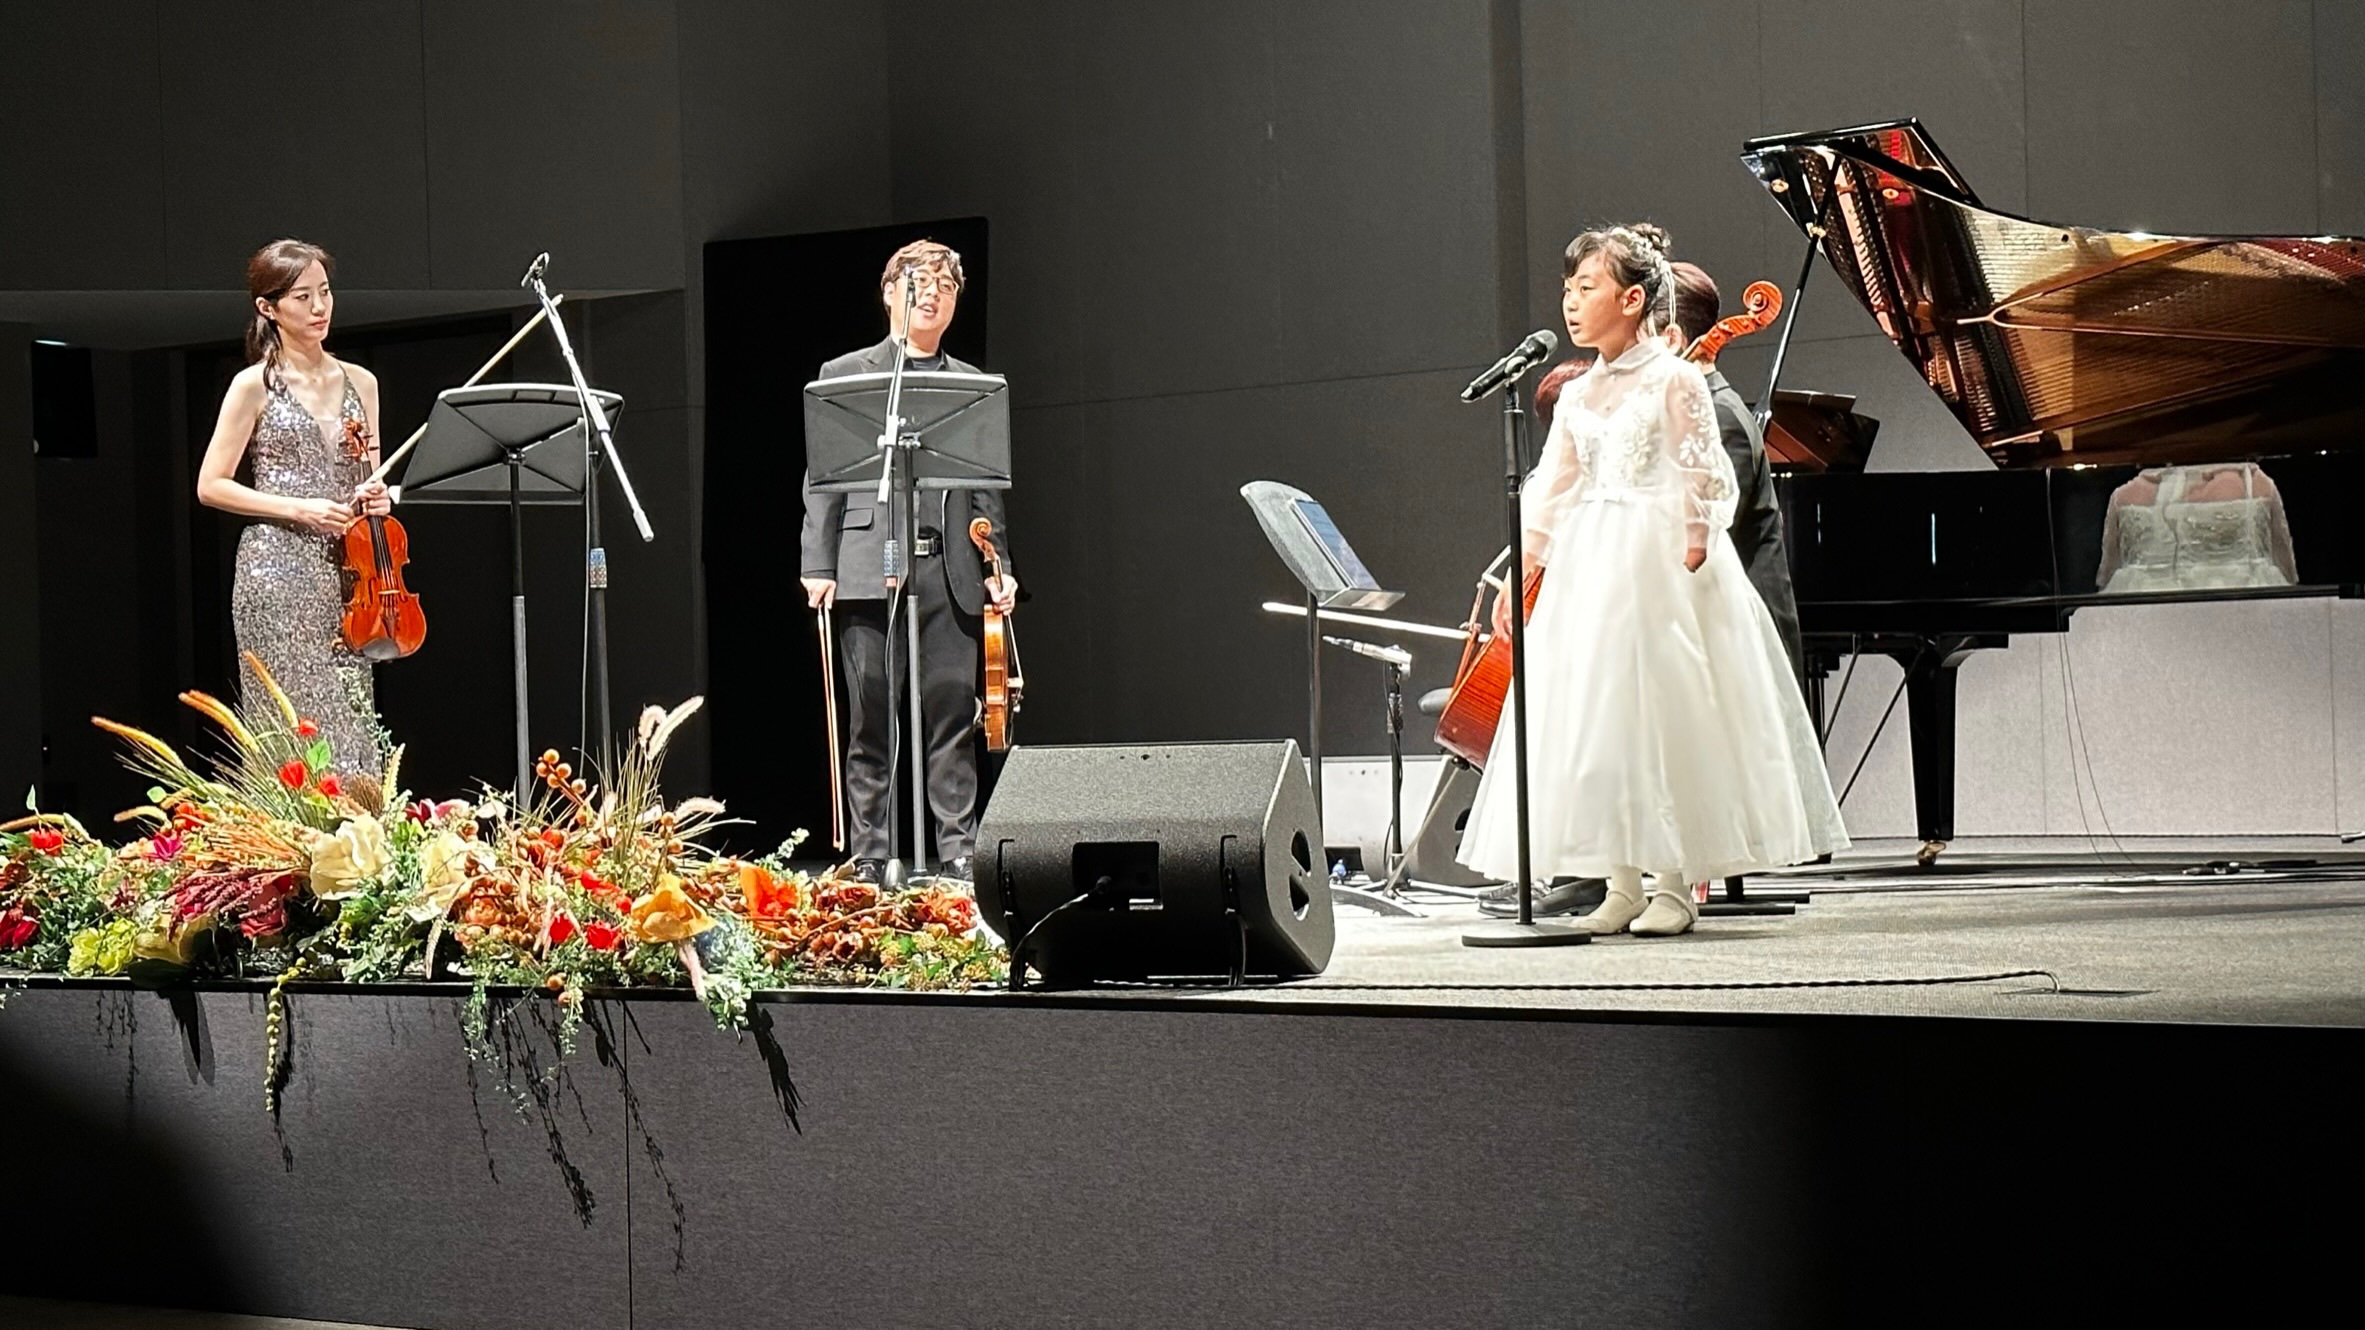 Concert at IAM highlighting South Korea student and professional artists